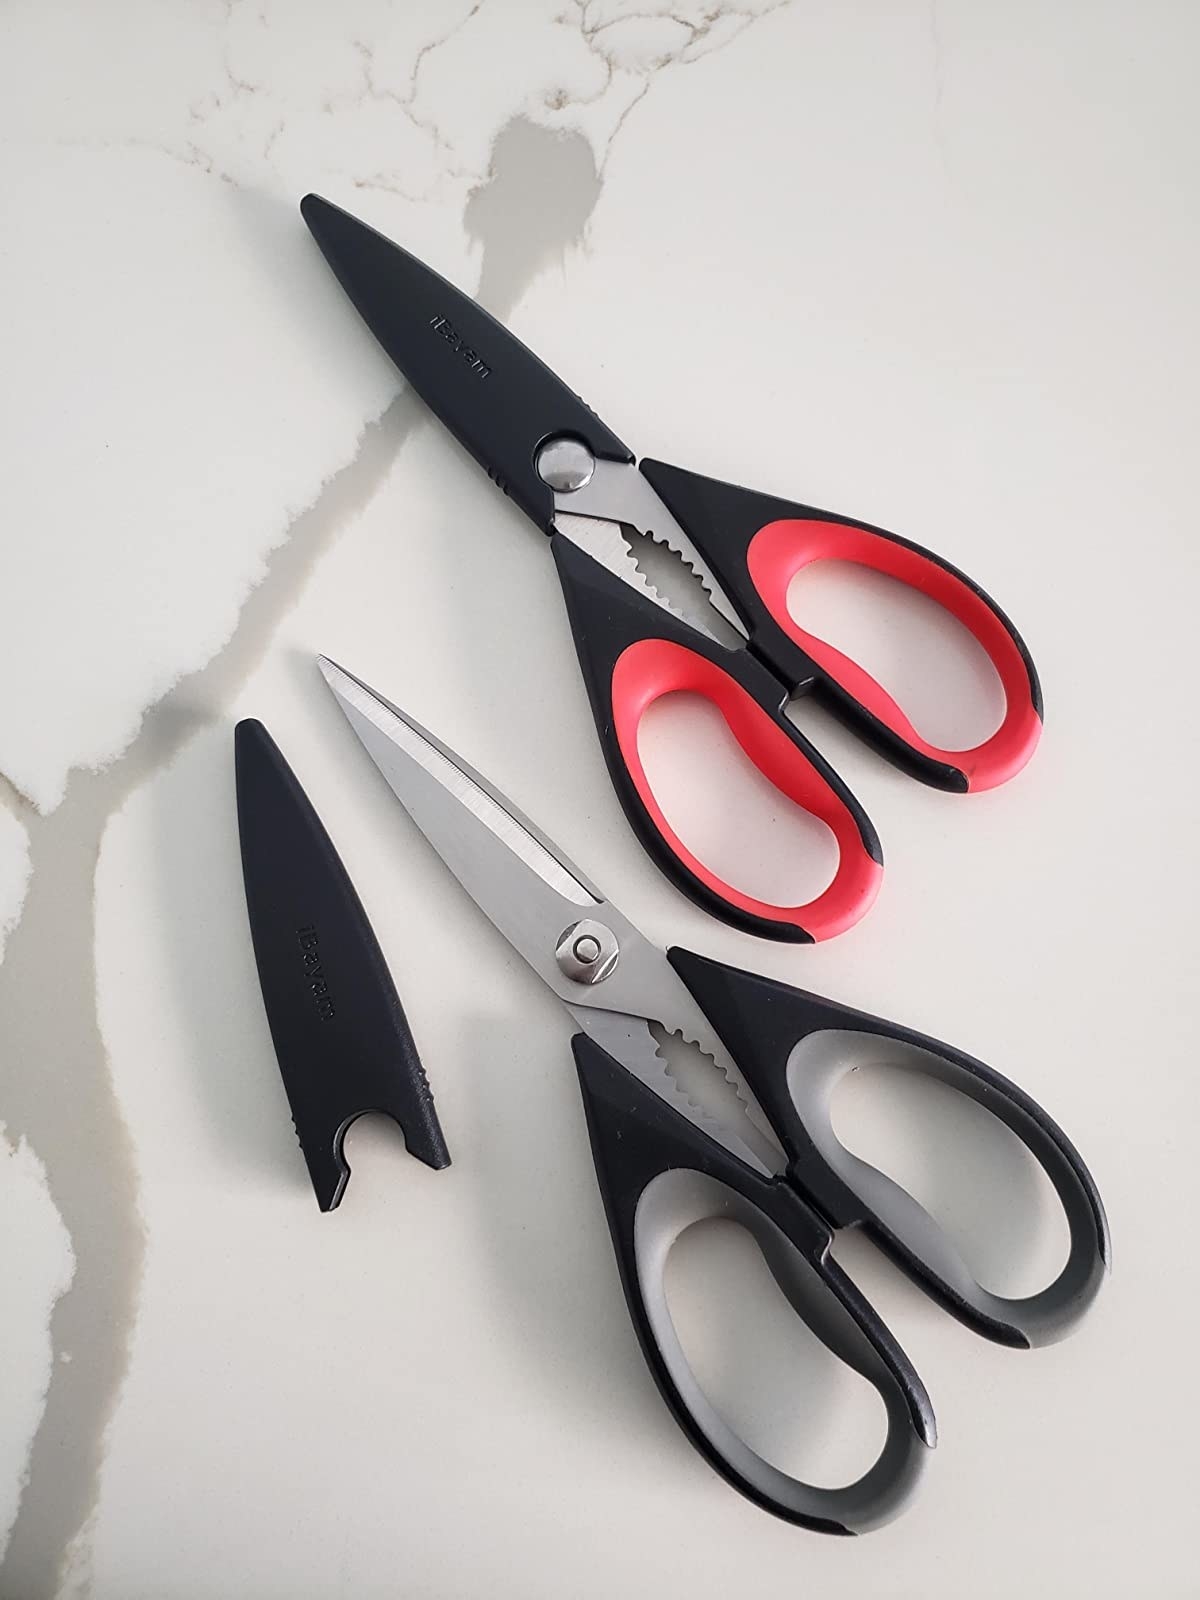 The scissors in red and gray